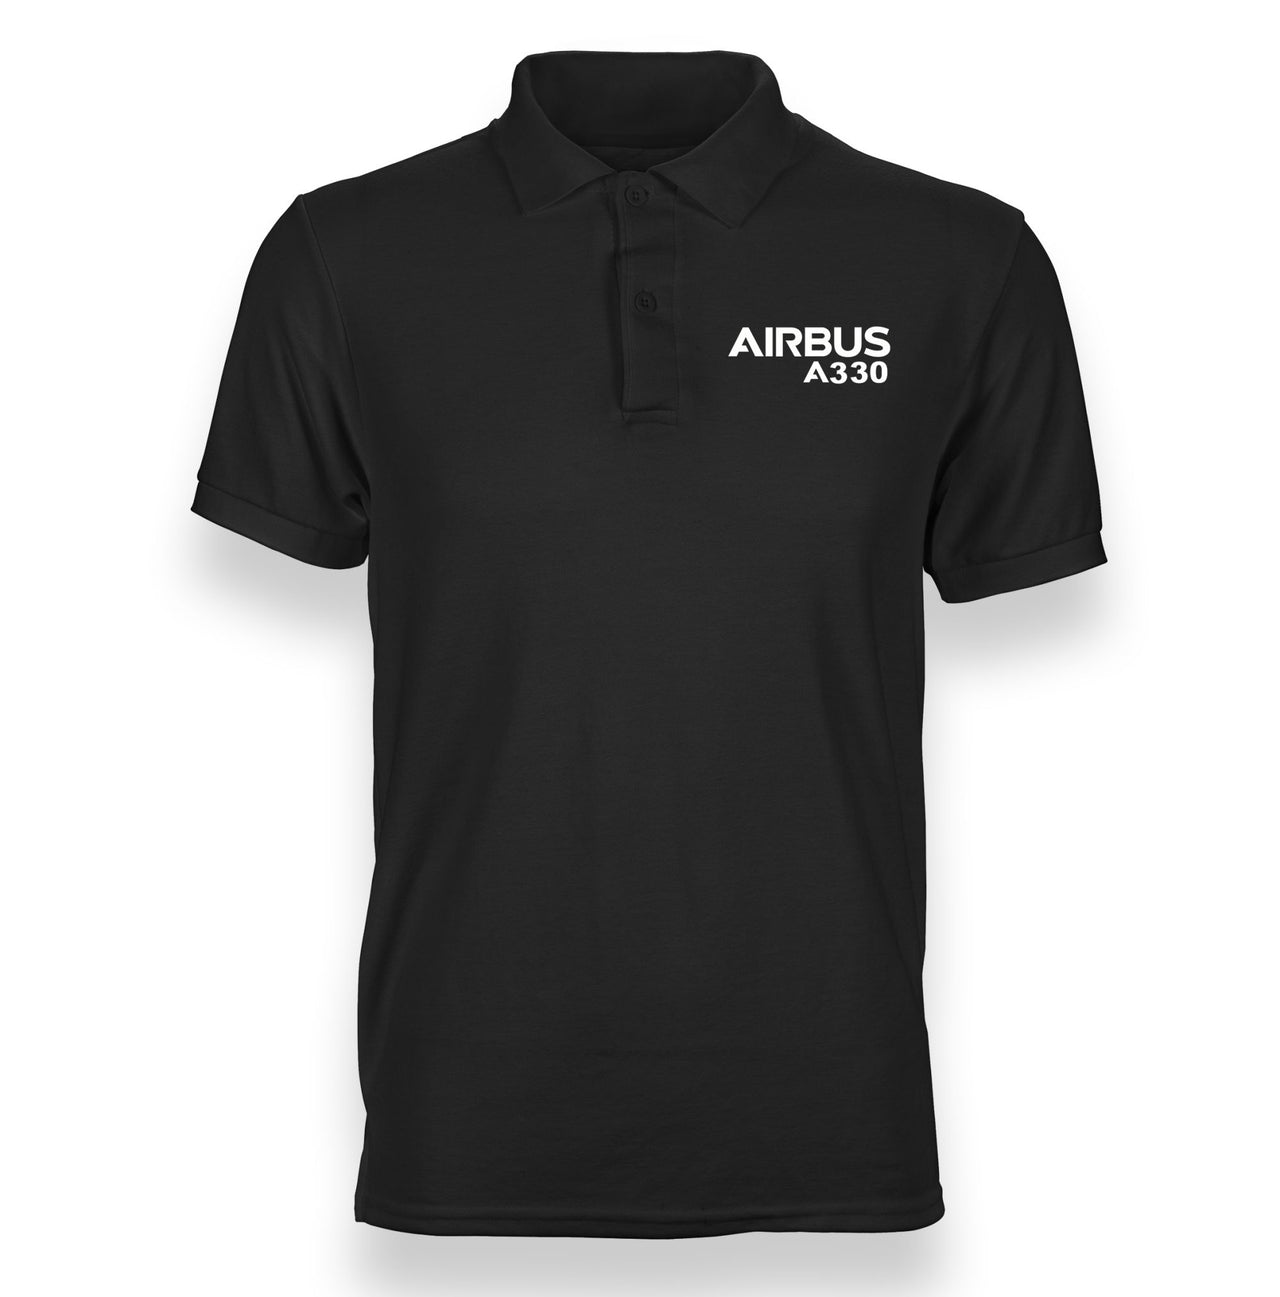 Airbus A330 & Text Designed "WOMEN" Polo T-Shirts